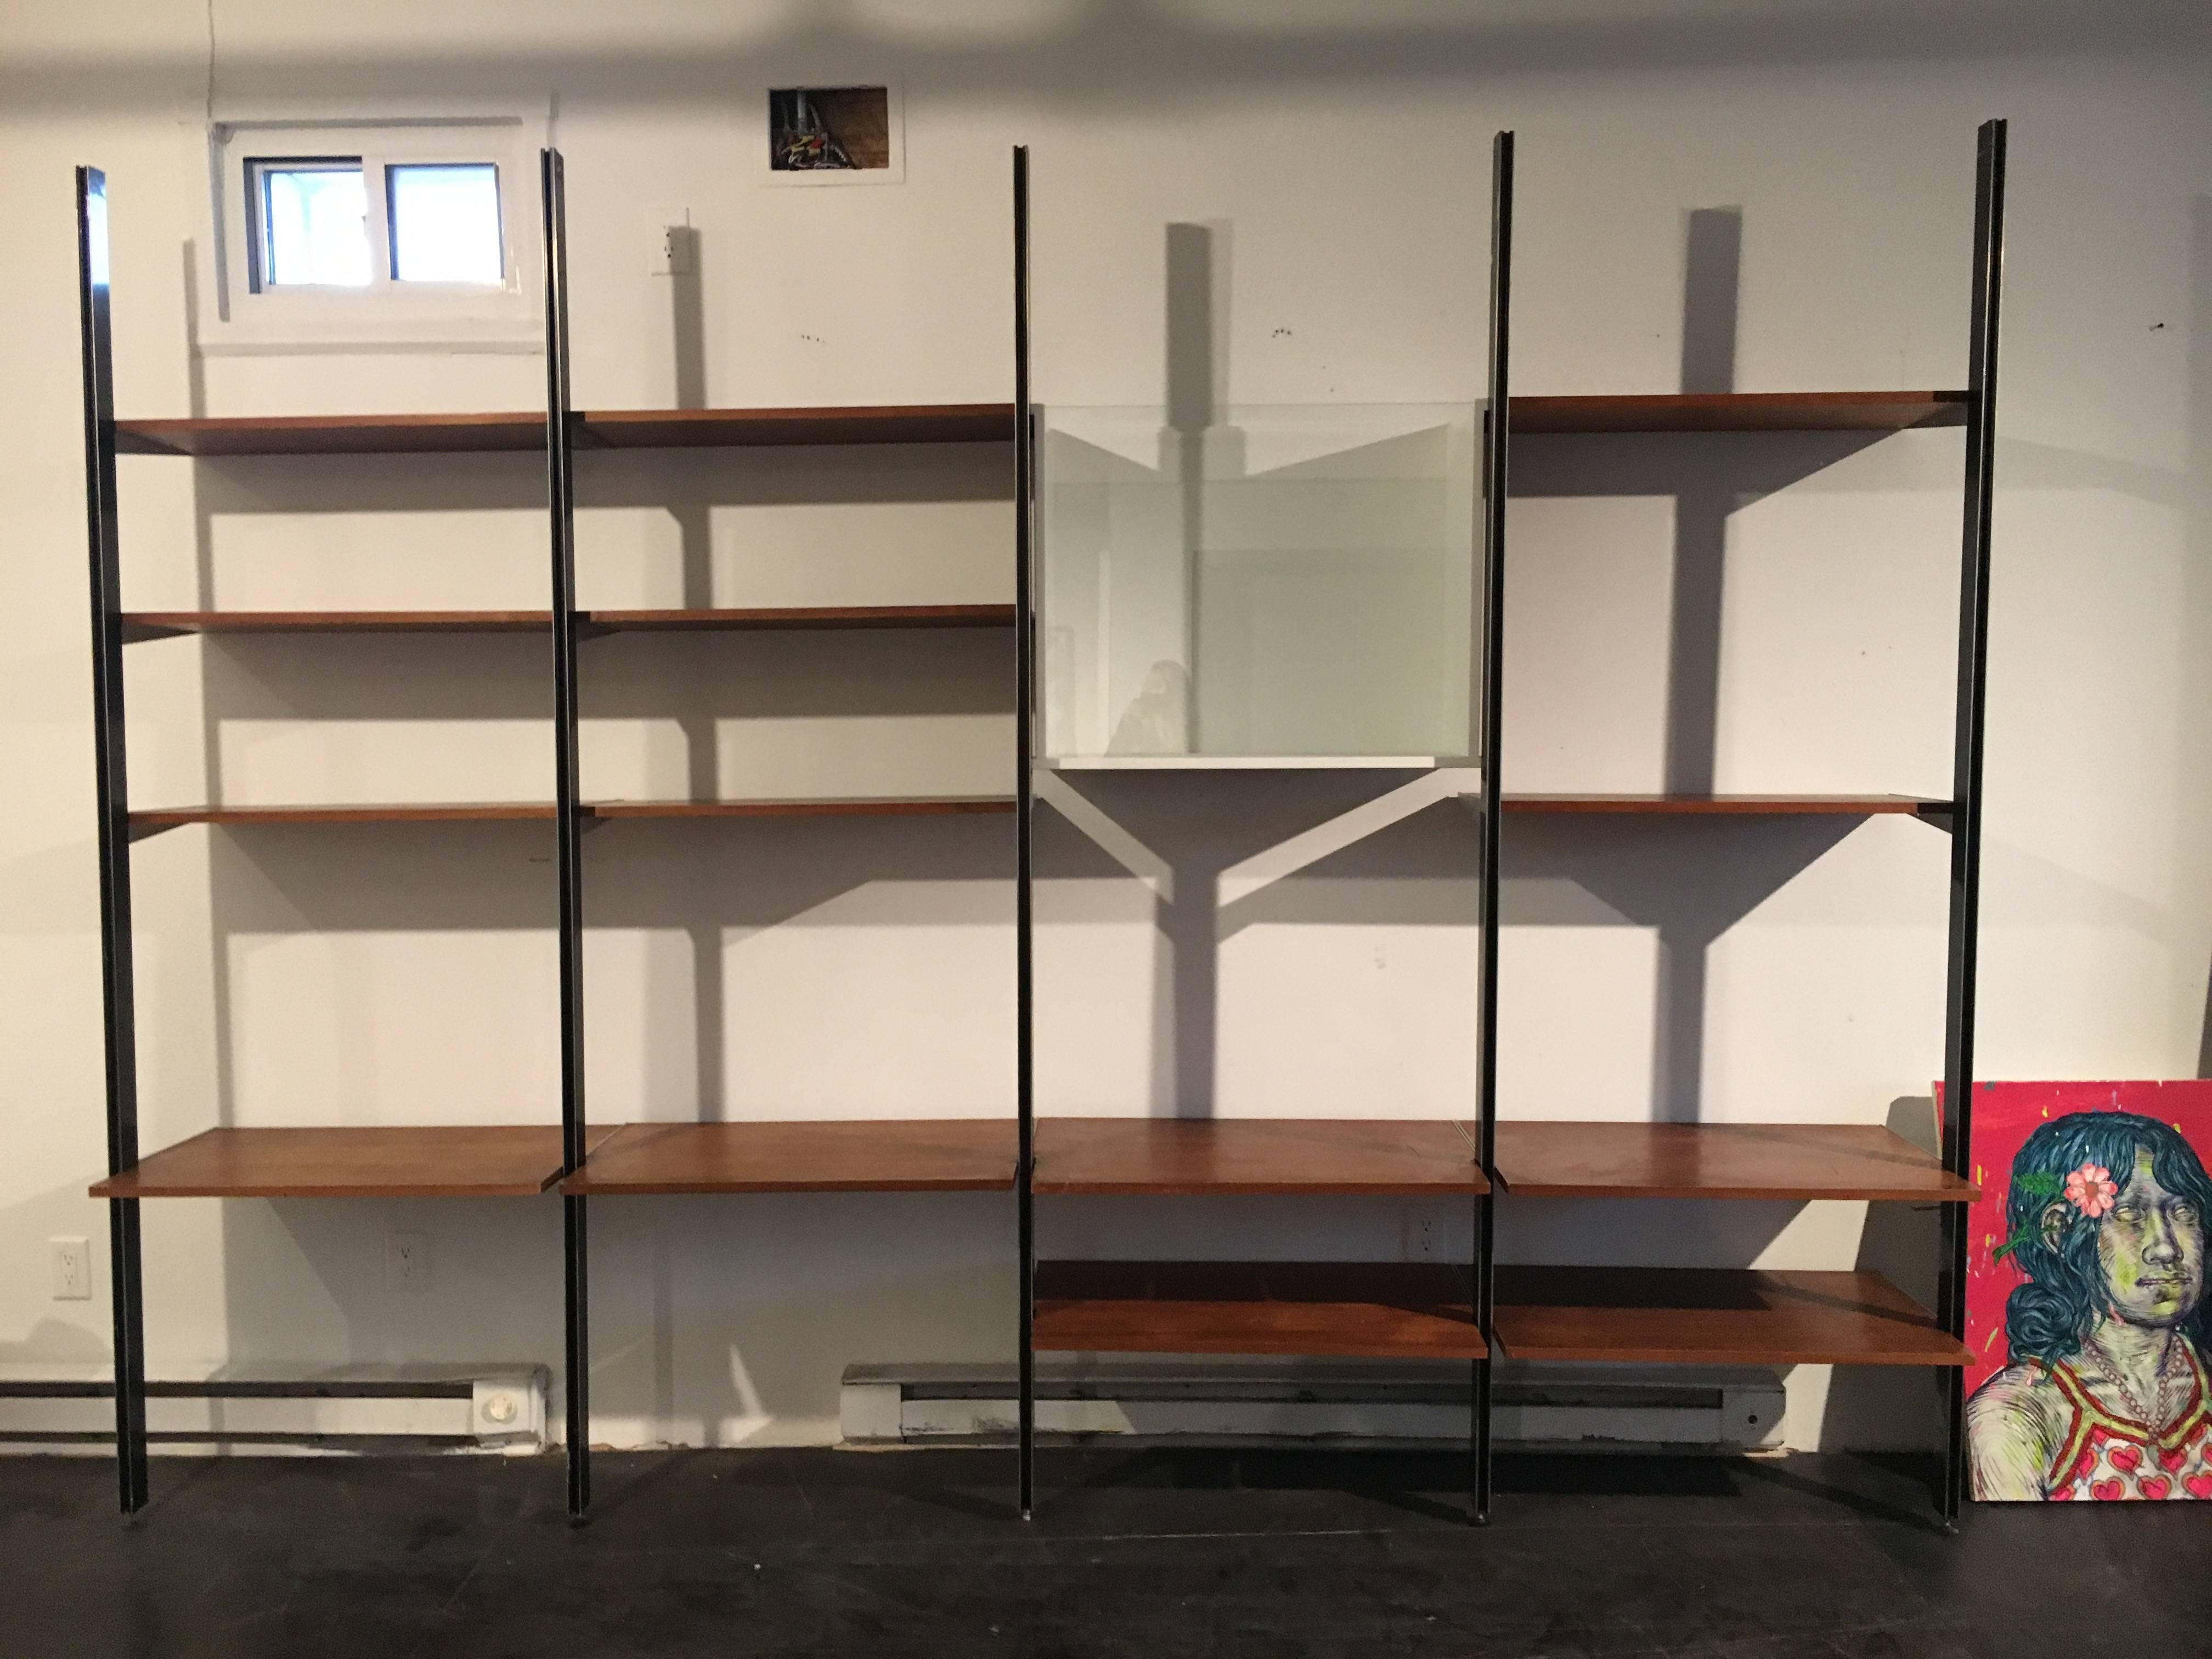 Four bay CSS (comprehensive storage system), designed by George Nelson for Herman Miller.
Walnut shelfs, rare glass front vitrine, all components are modular.